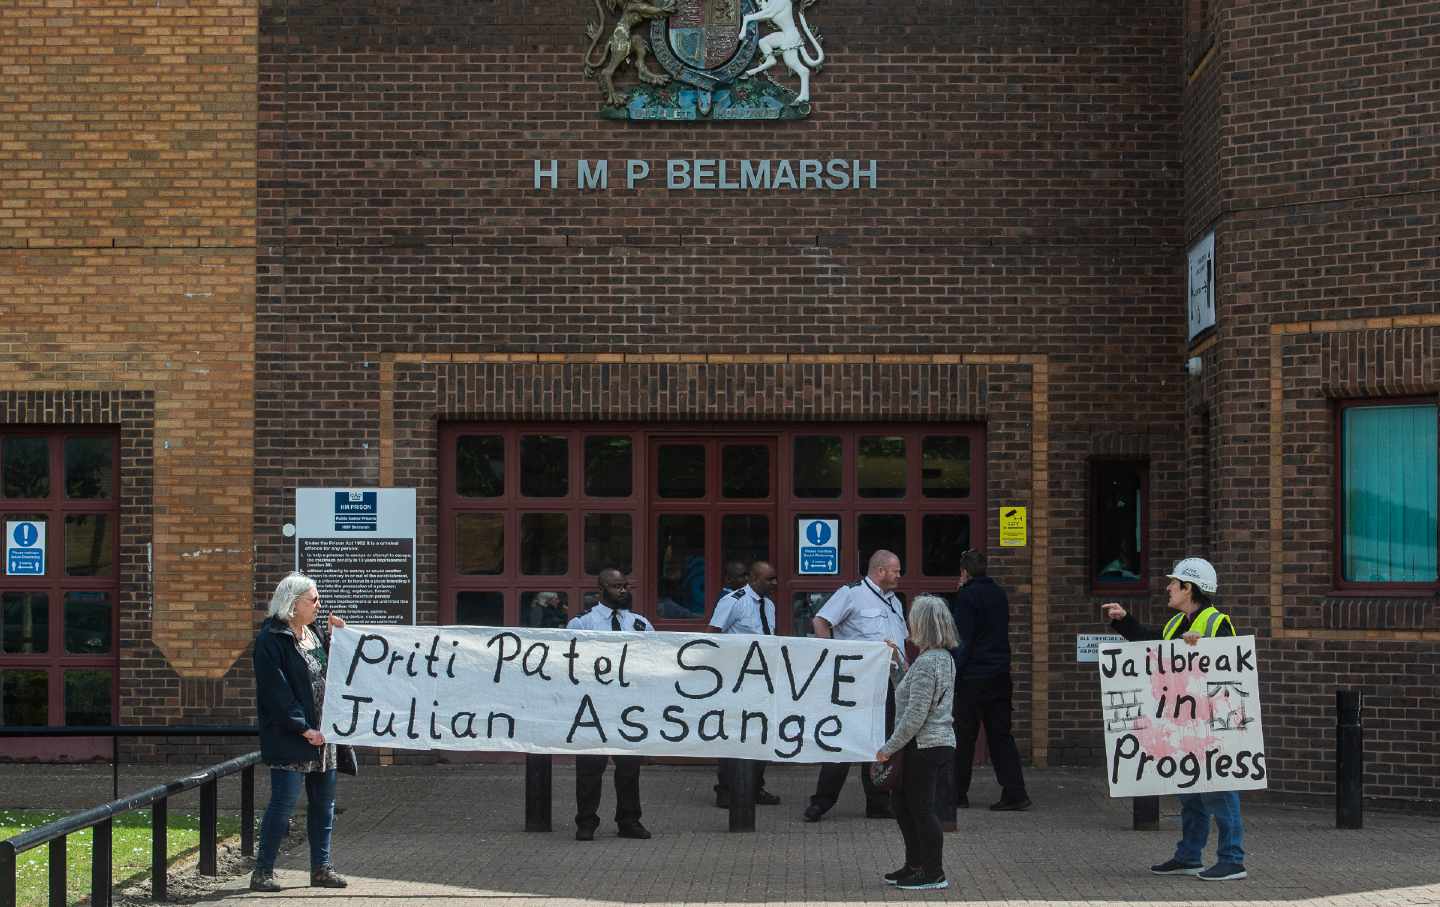 A Visit to Belmarsh Prison, Where Julian Assange Awaits His Final Appeal Against Extradition to the US